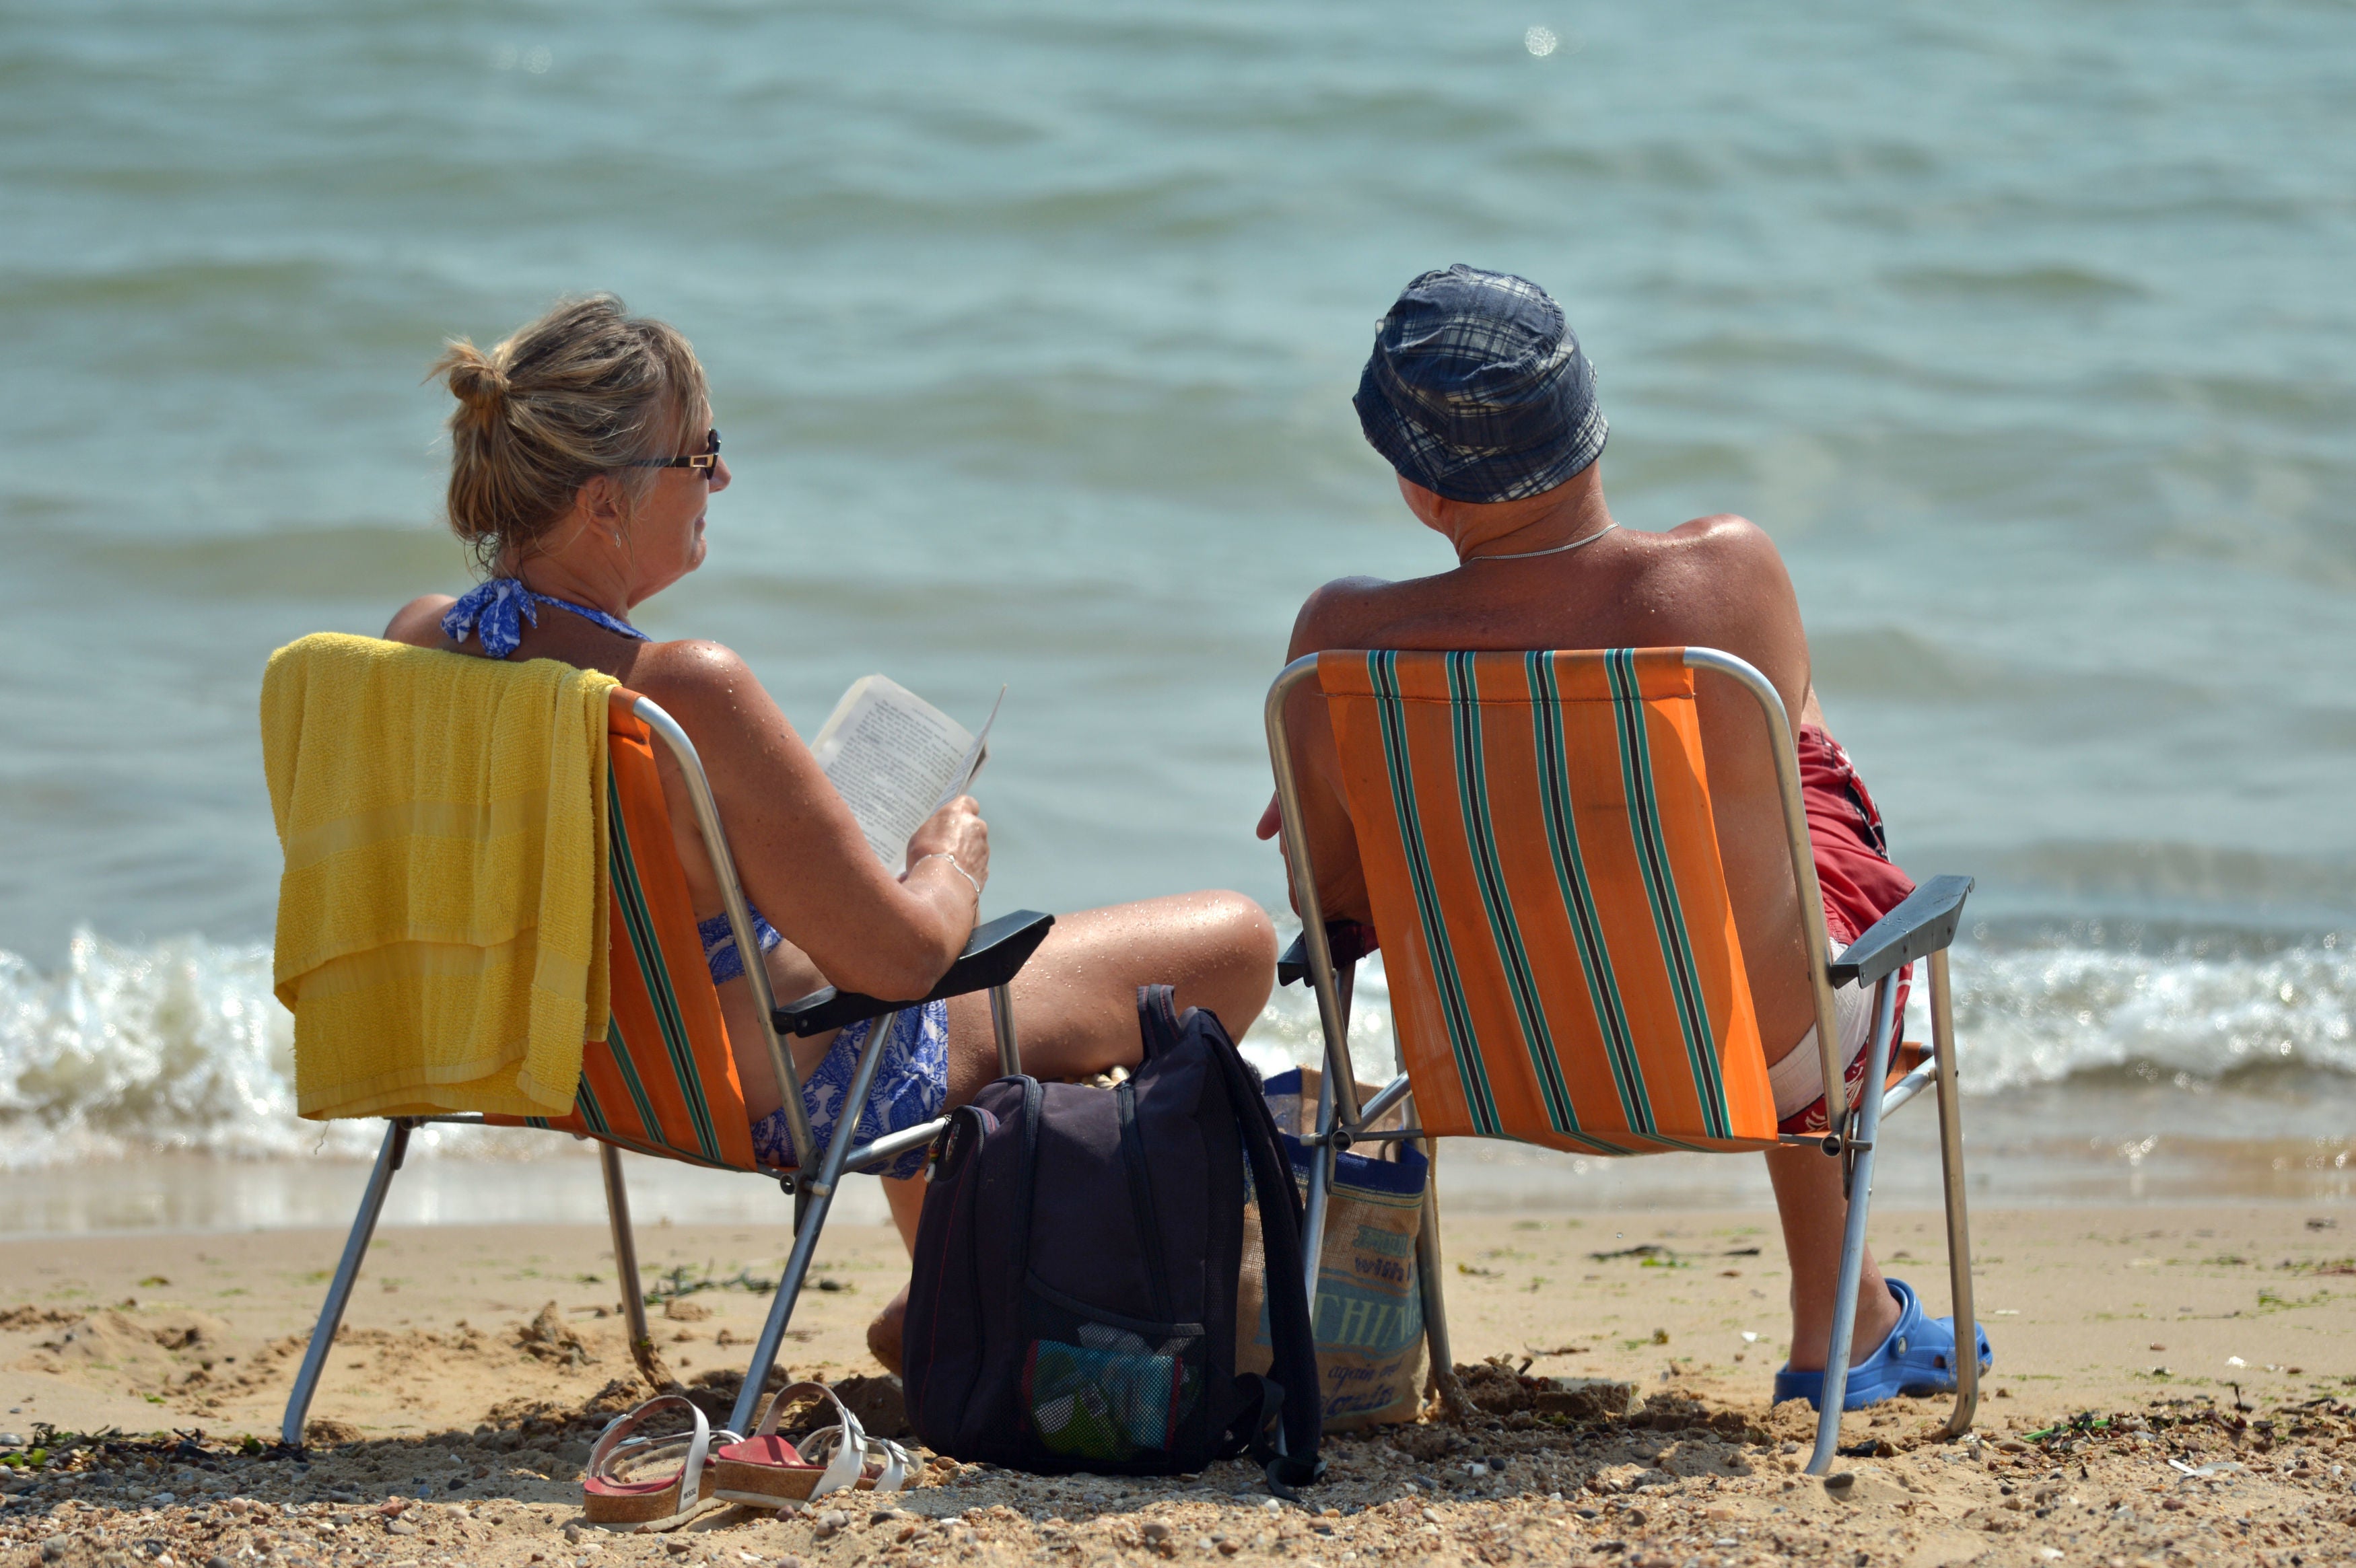 A couple enjoy the hot weather on the beach at Clacton-on-Sea in Essex